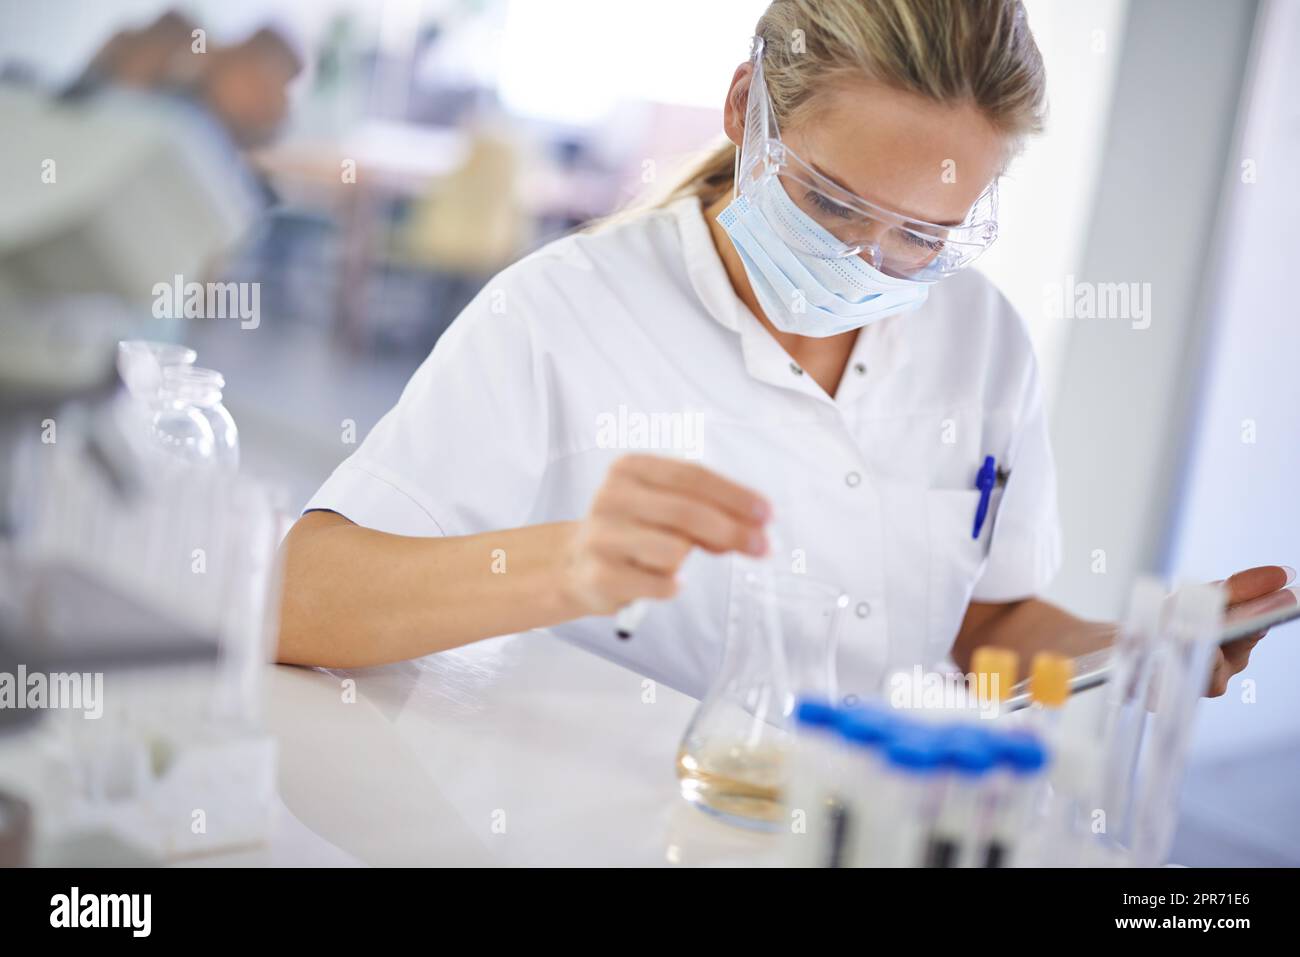 Testing a theory. A young scientist conducting an experiment in her lab. Stock Photo